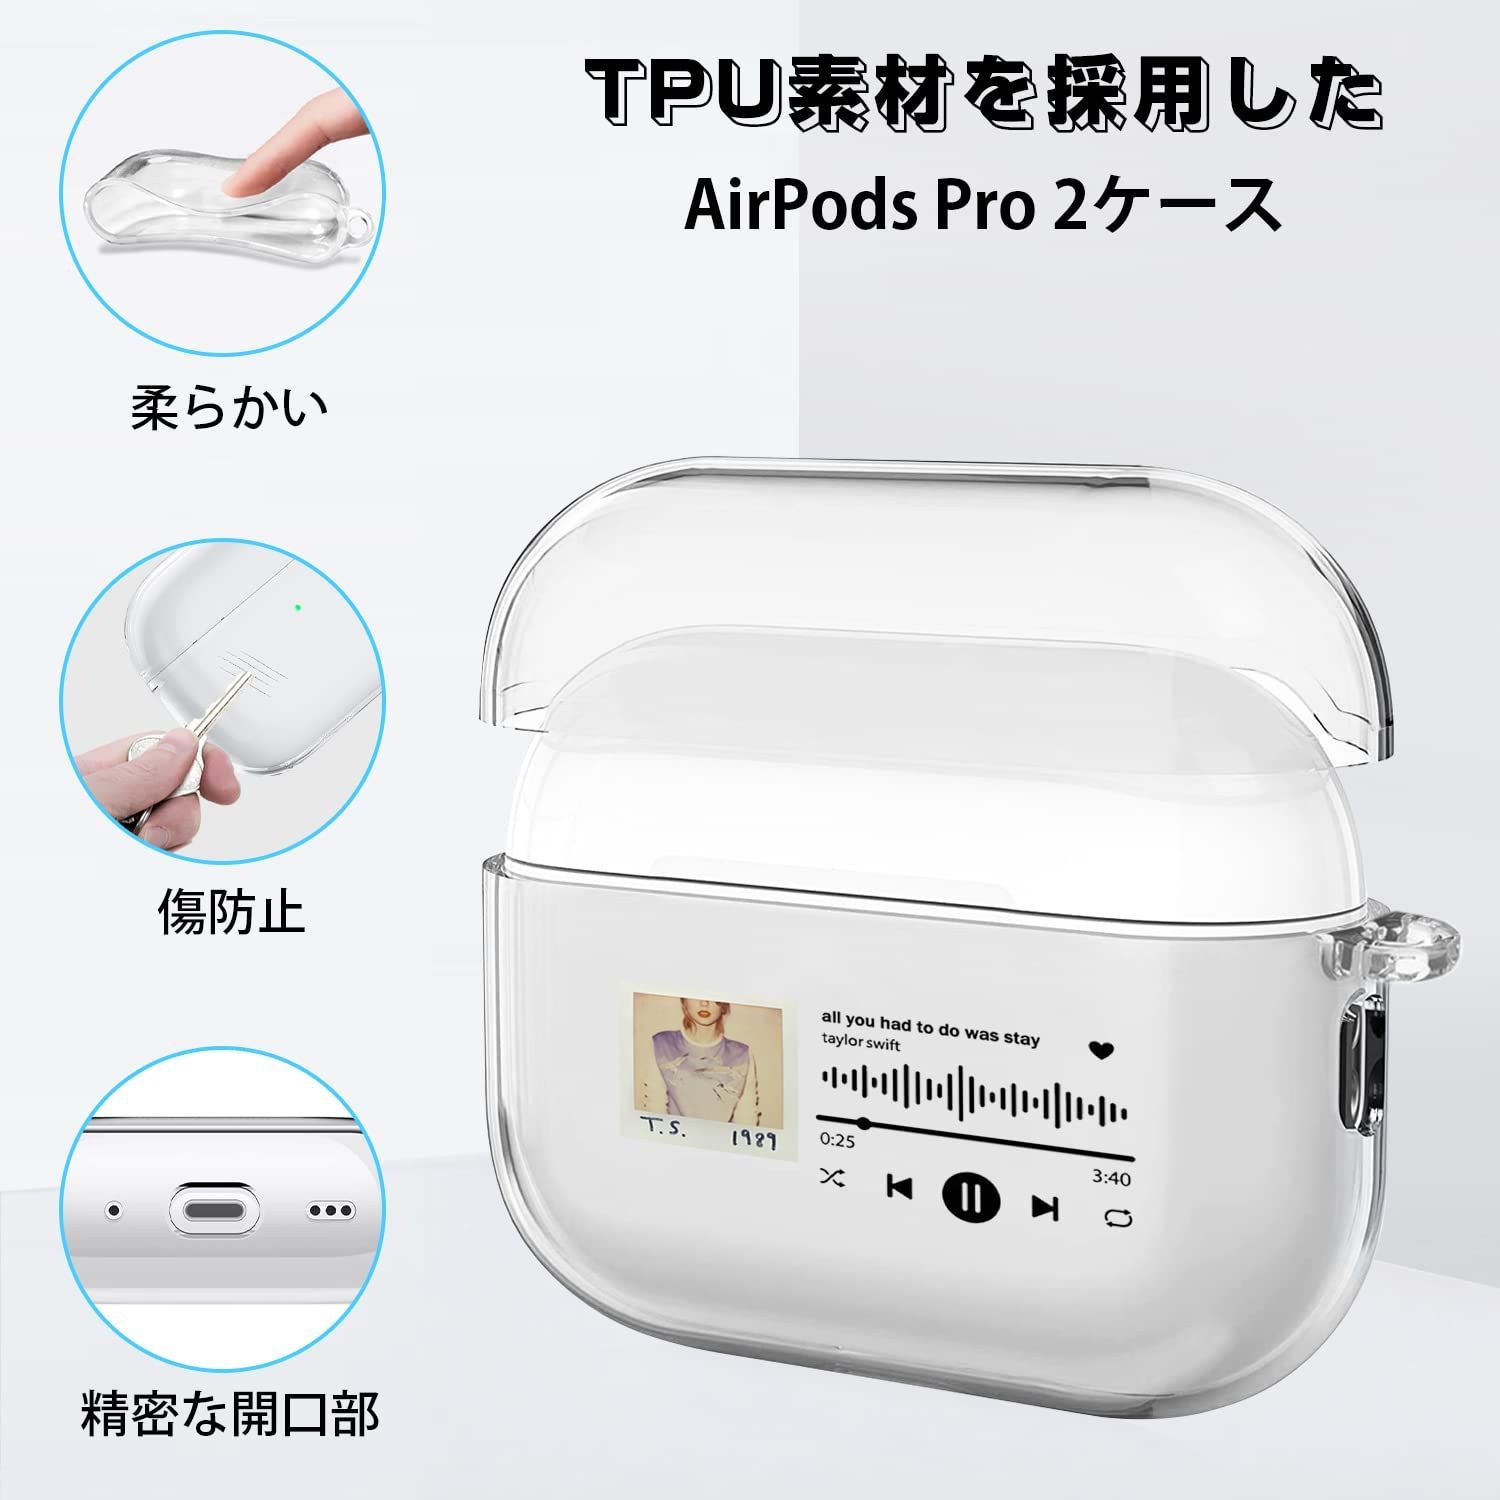 AirPods【おにさま専用】在庫残り1台！Chargecase - その他